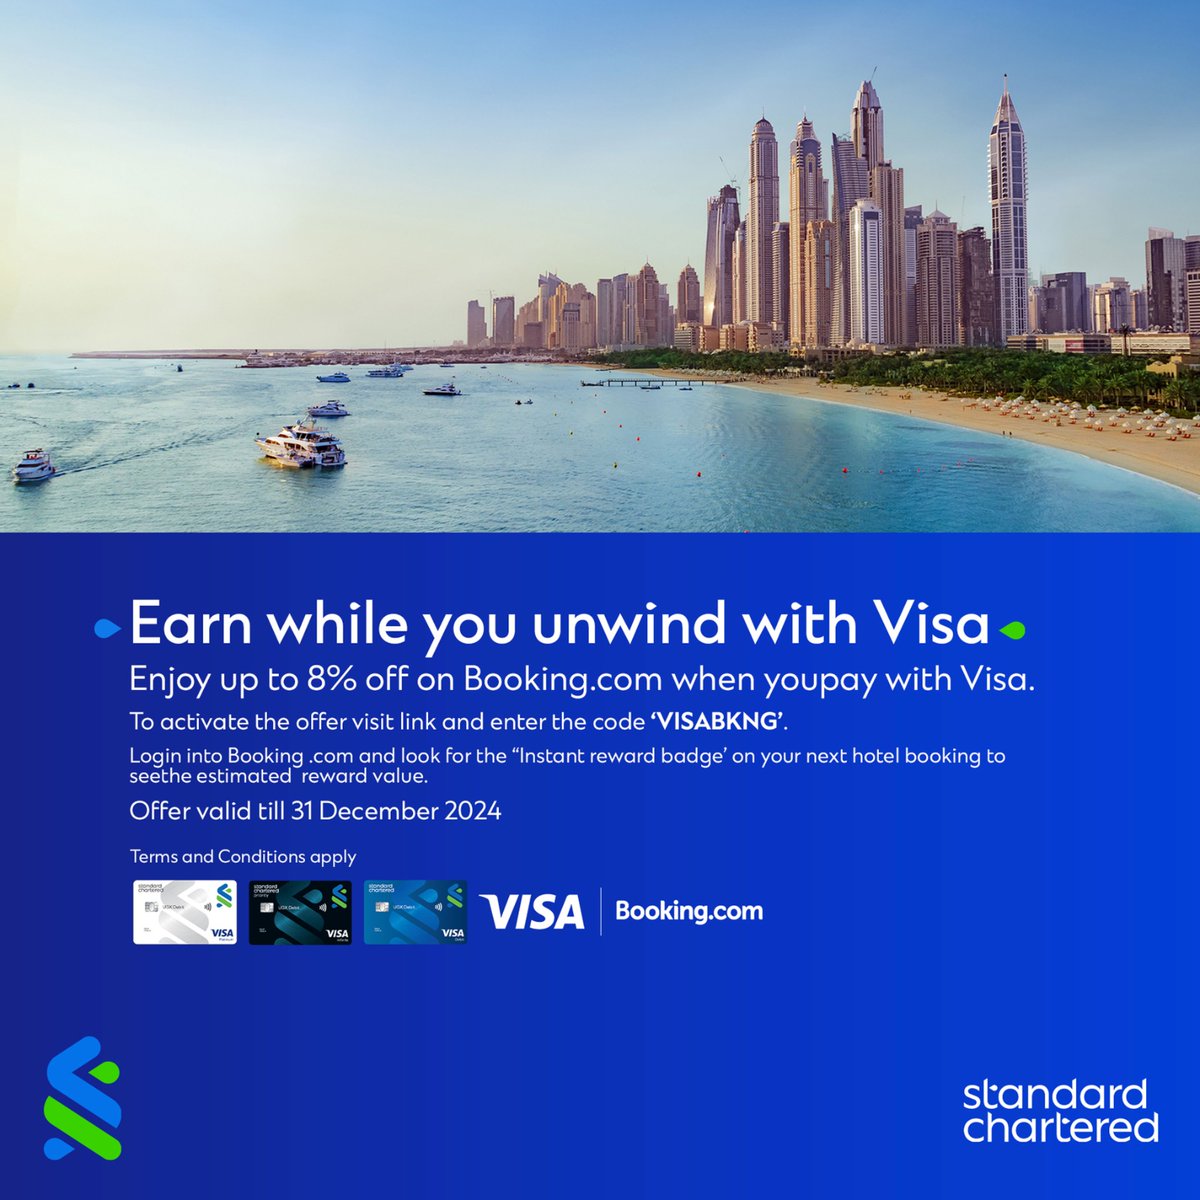 Unlock your wanderlust dreams with Visa! Use code VISABNKG on Booking.com and save up to 8% on your next adventure. This offer is valid until December 31, 2024! #TravelMoreWithVisa #HereForGood